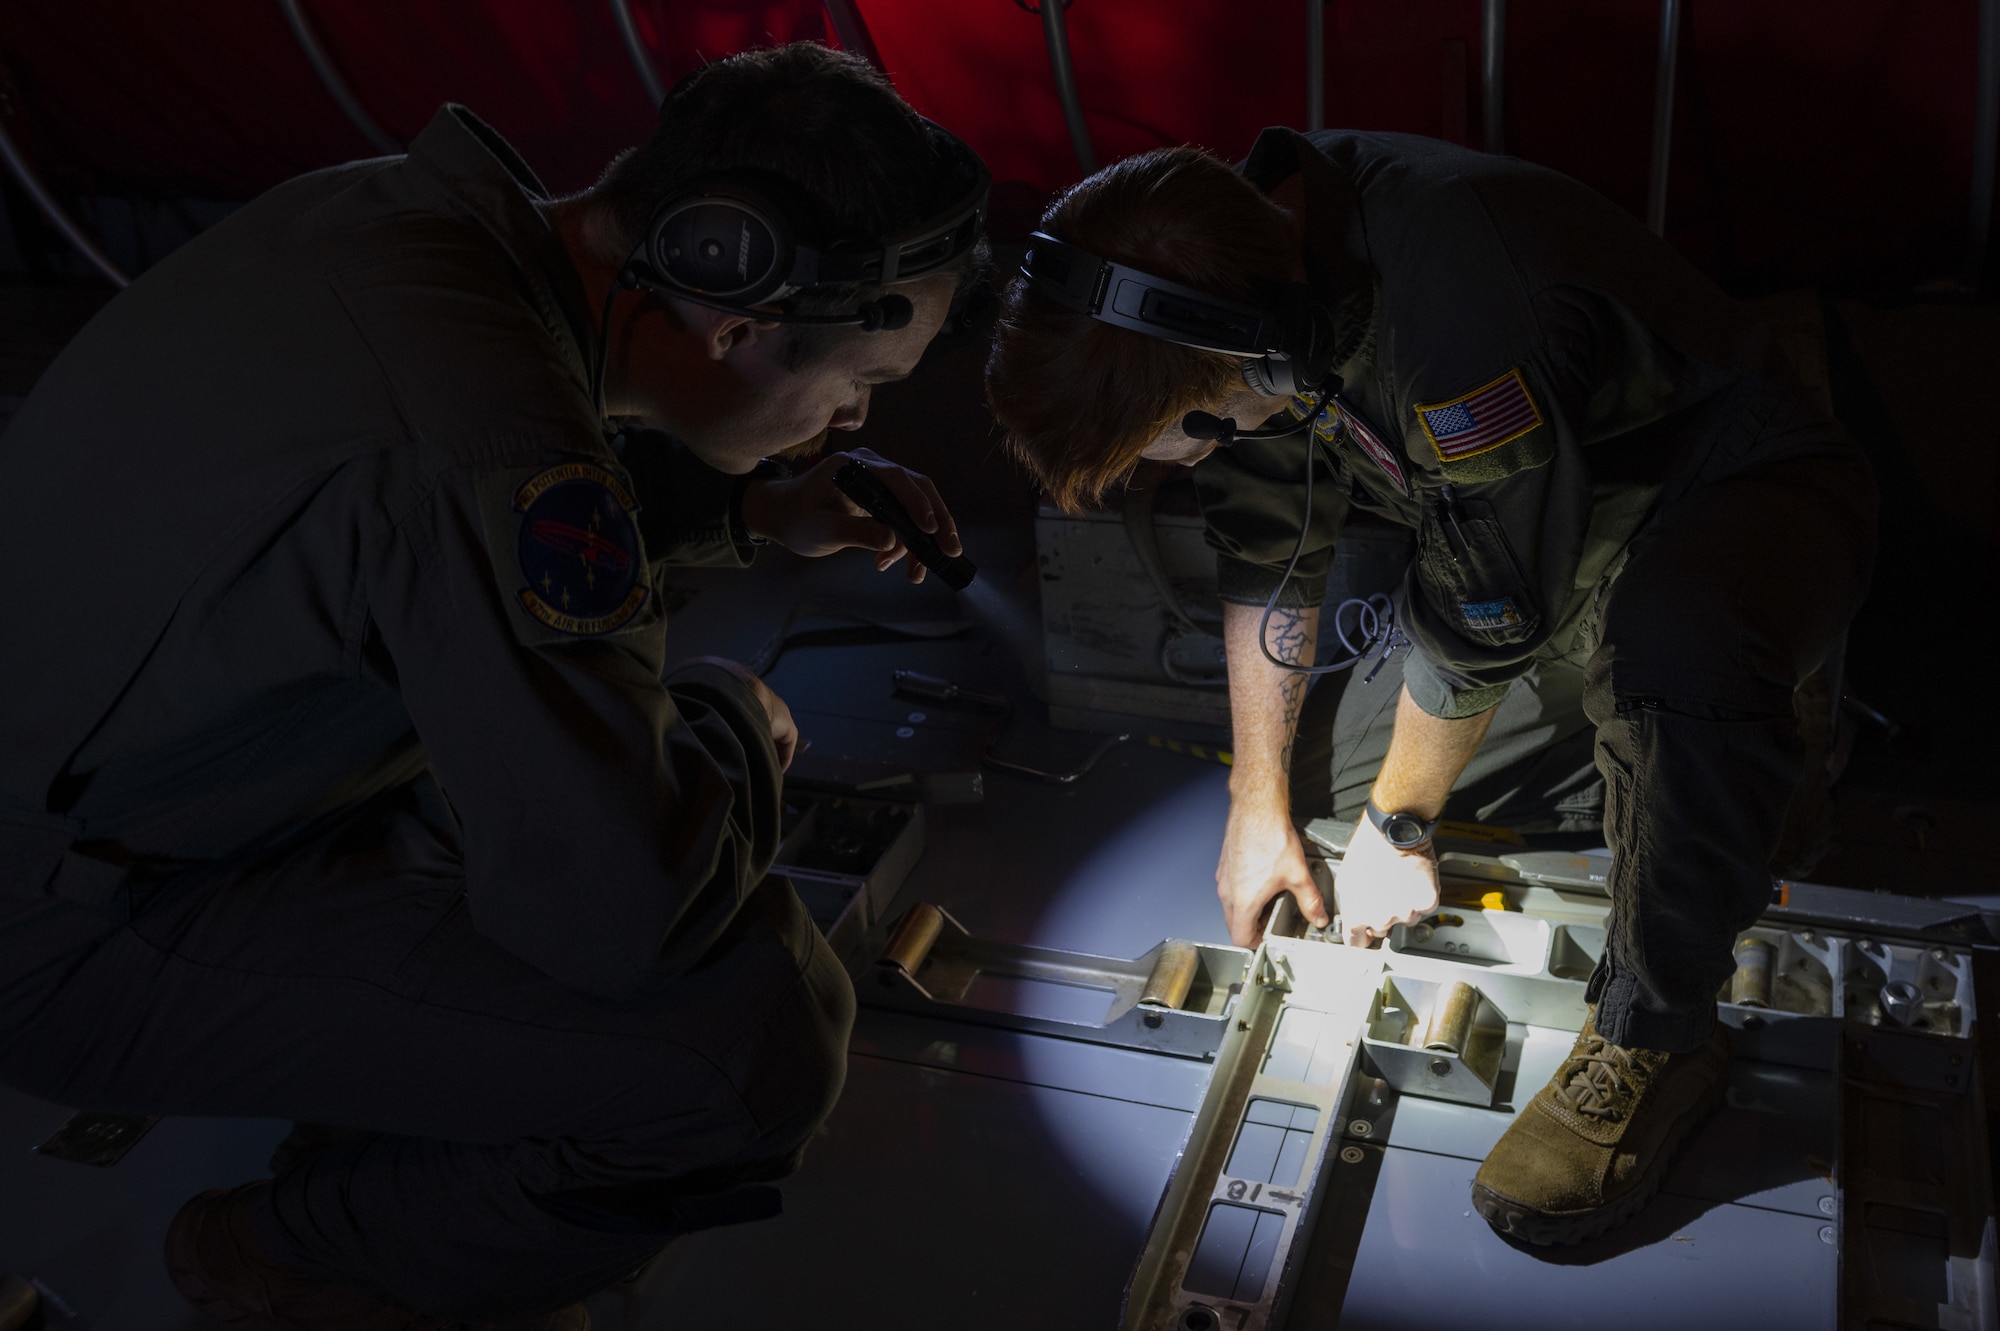 U.S. Air Force Senior Airman Matthew Ronnfeldt (left), 97th Air Refueling Squadron in-flight refueling specialist, and Senior Airman Dakota Griffis (right), 384th ARS in-flight refueling specialist, inspect cargo rollers prior to takeoff from Fairchild Air Force Base, Washington, Nov. 18, 2022. Depending on fuel storage configuration, the KC-135 Stratotanker aircraft can carry up to 83,000 pounds of cargo, which is loaded, unloaded and monitored by in-flight refueling specialists. (U.S. Air Force photo by Staff Sgt. Lawrence Sena)